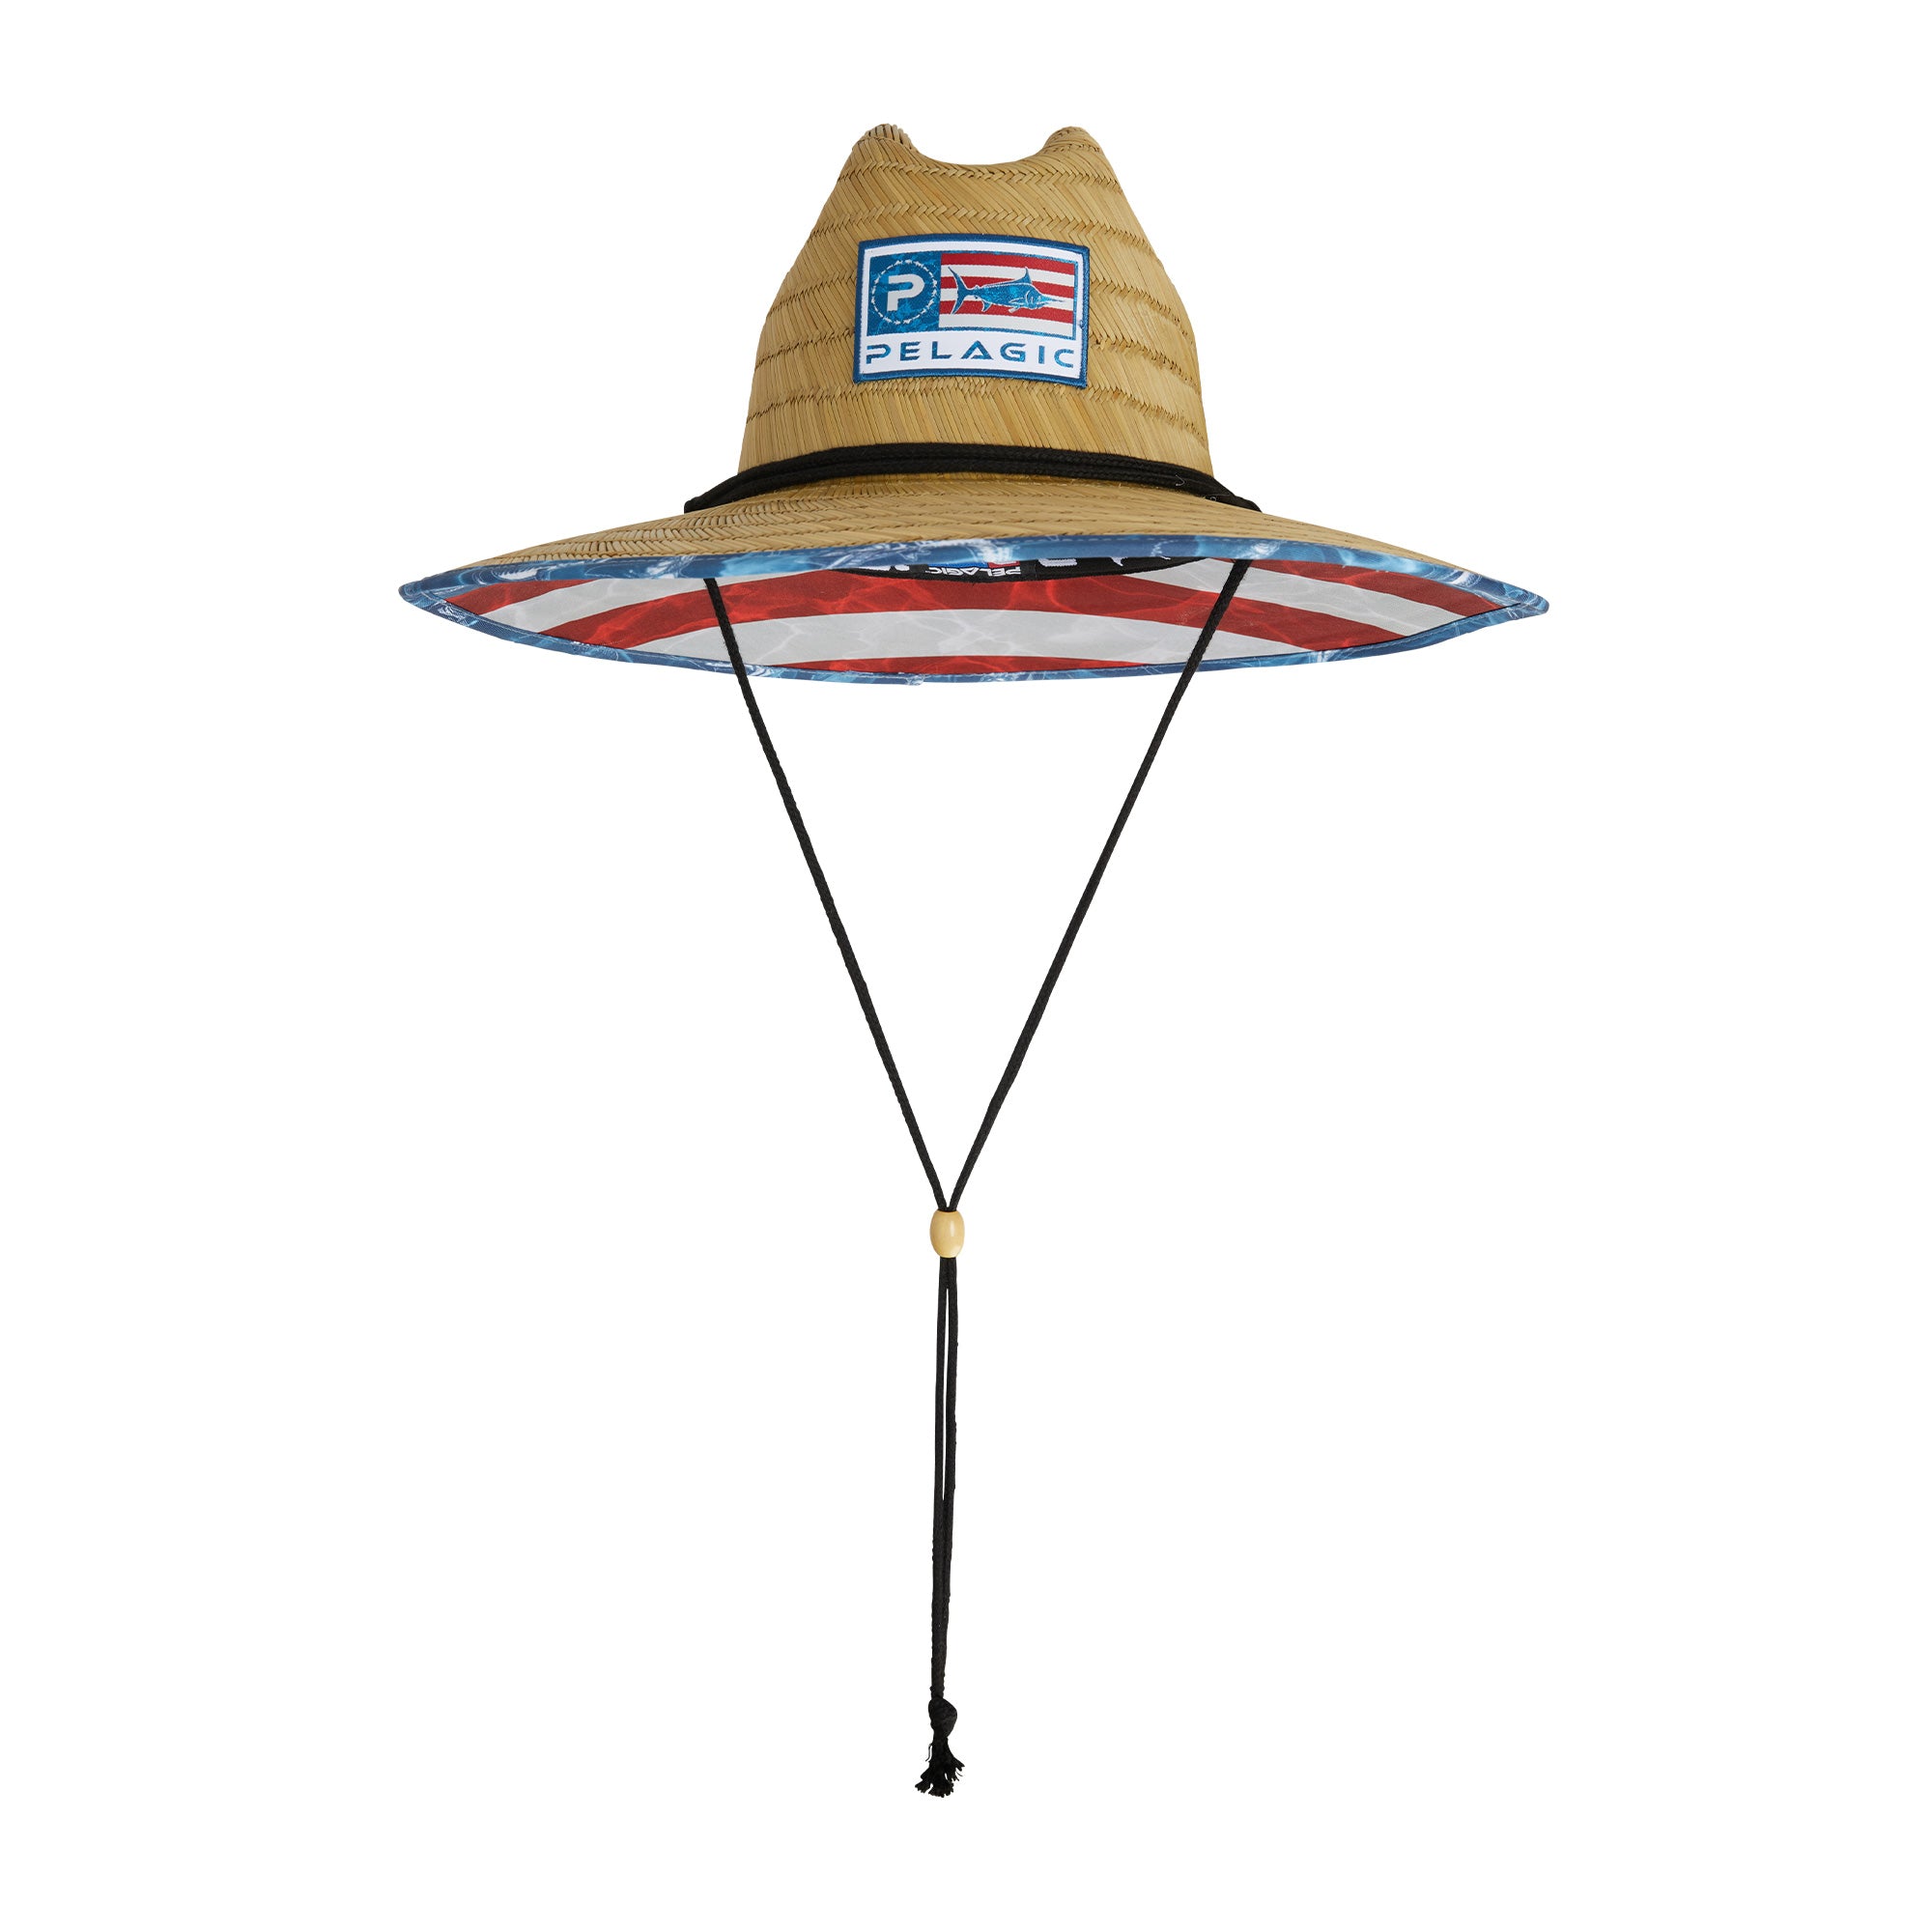 Pelagic - INTRODUCING THE NEW BAJA STRAW HAT! The perfect hat for